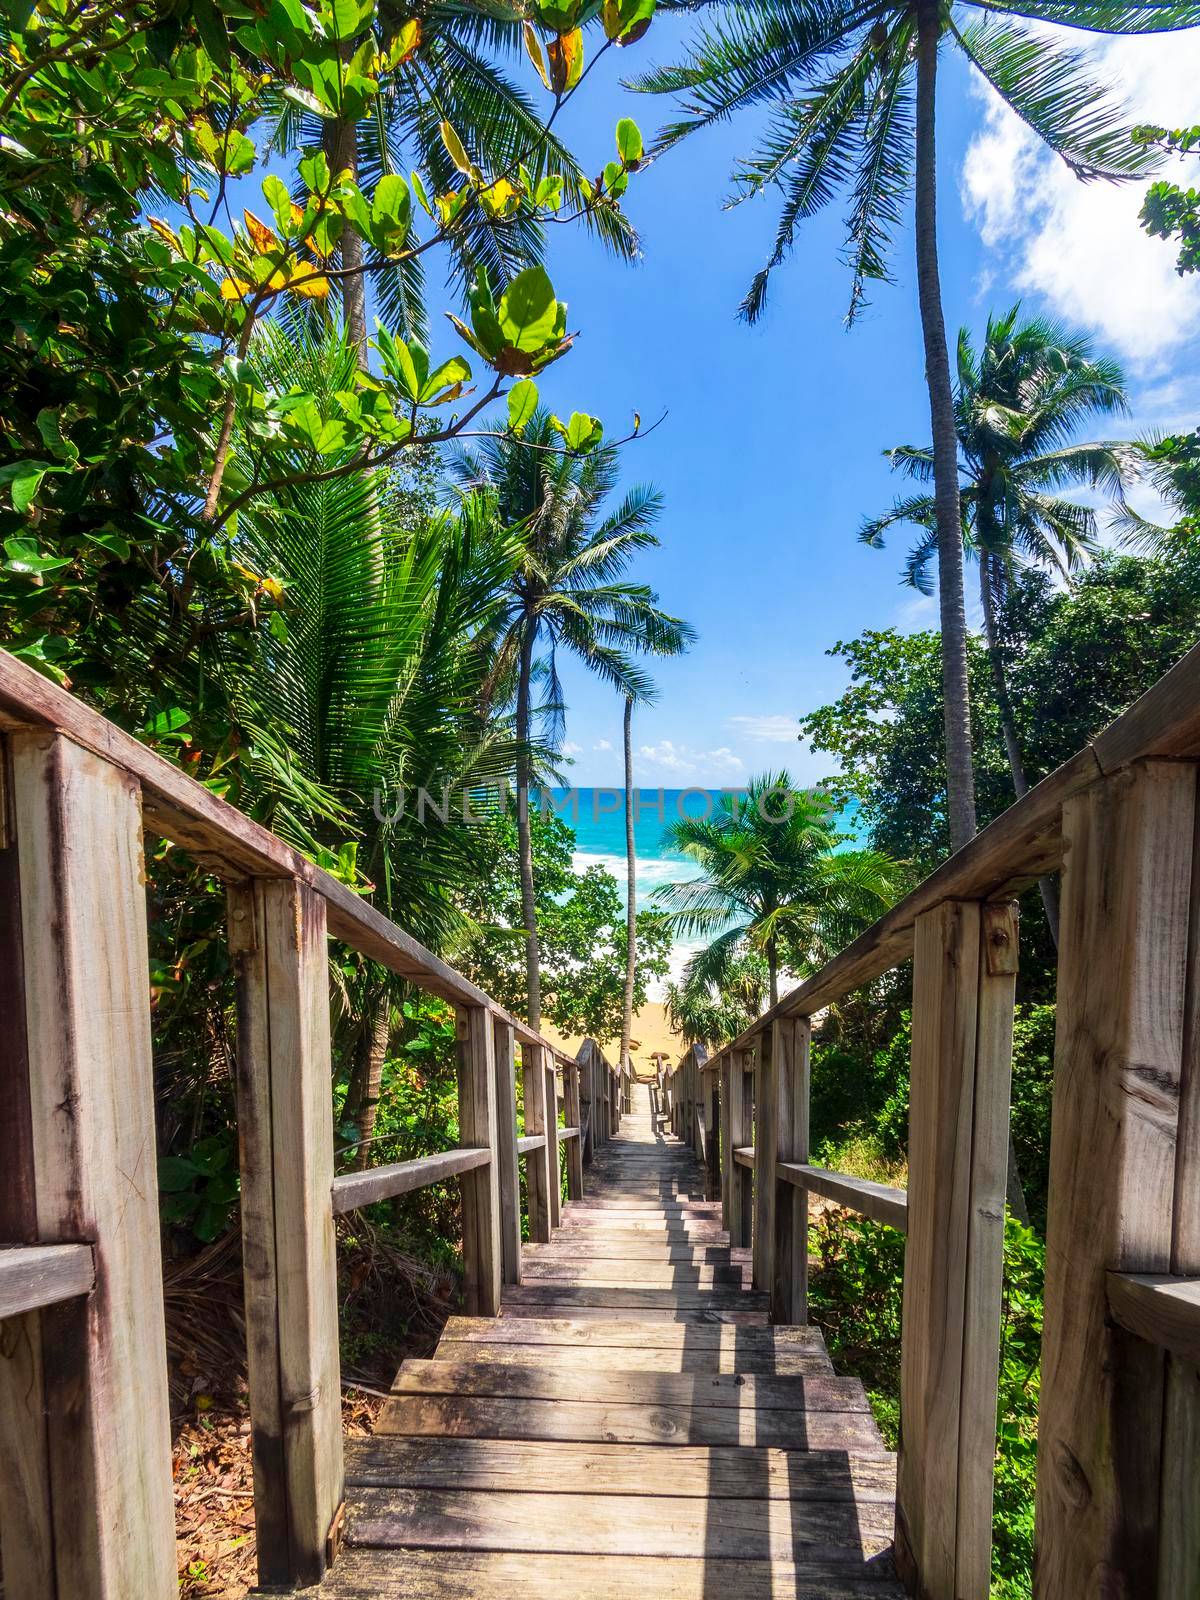 Wooden steps leading down to the beach. Wooden stairs down to the tropical beach. Phuket freedom beach Thailand. Summer day holiday vacation concept by Satrinekarn